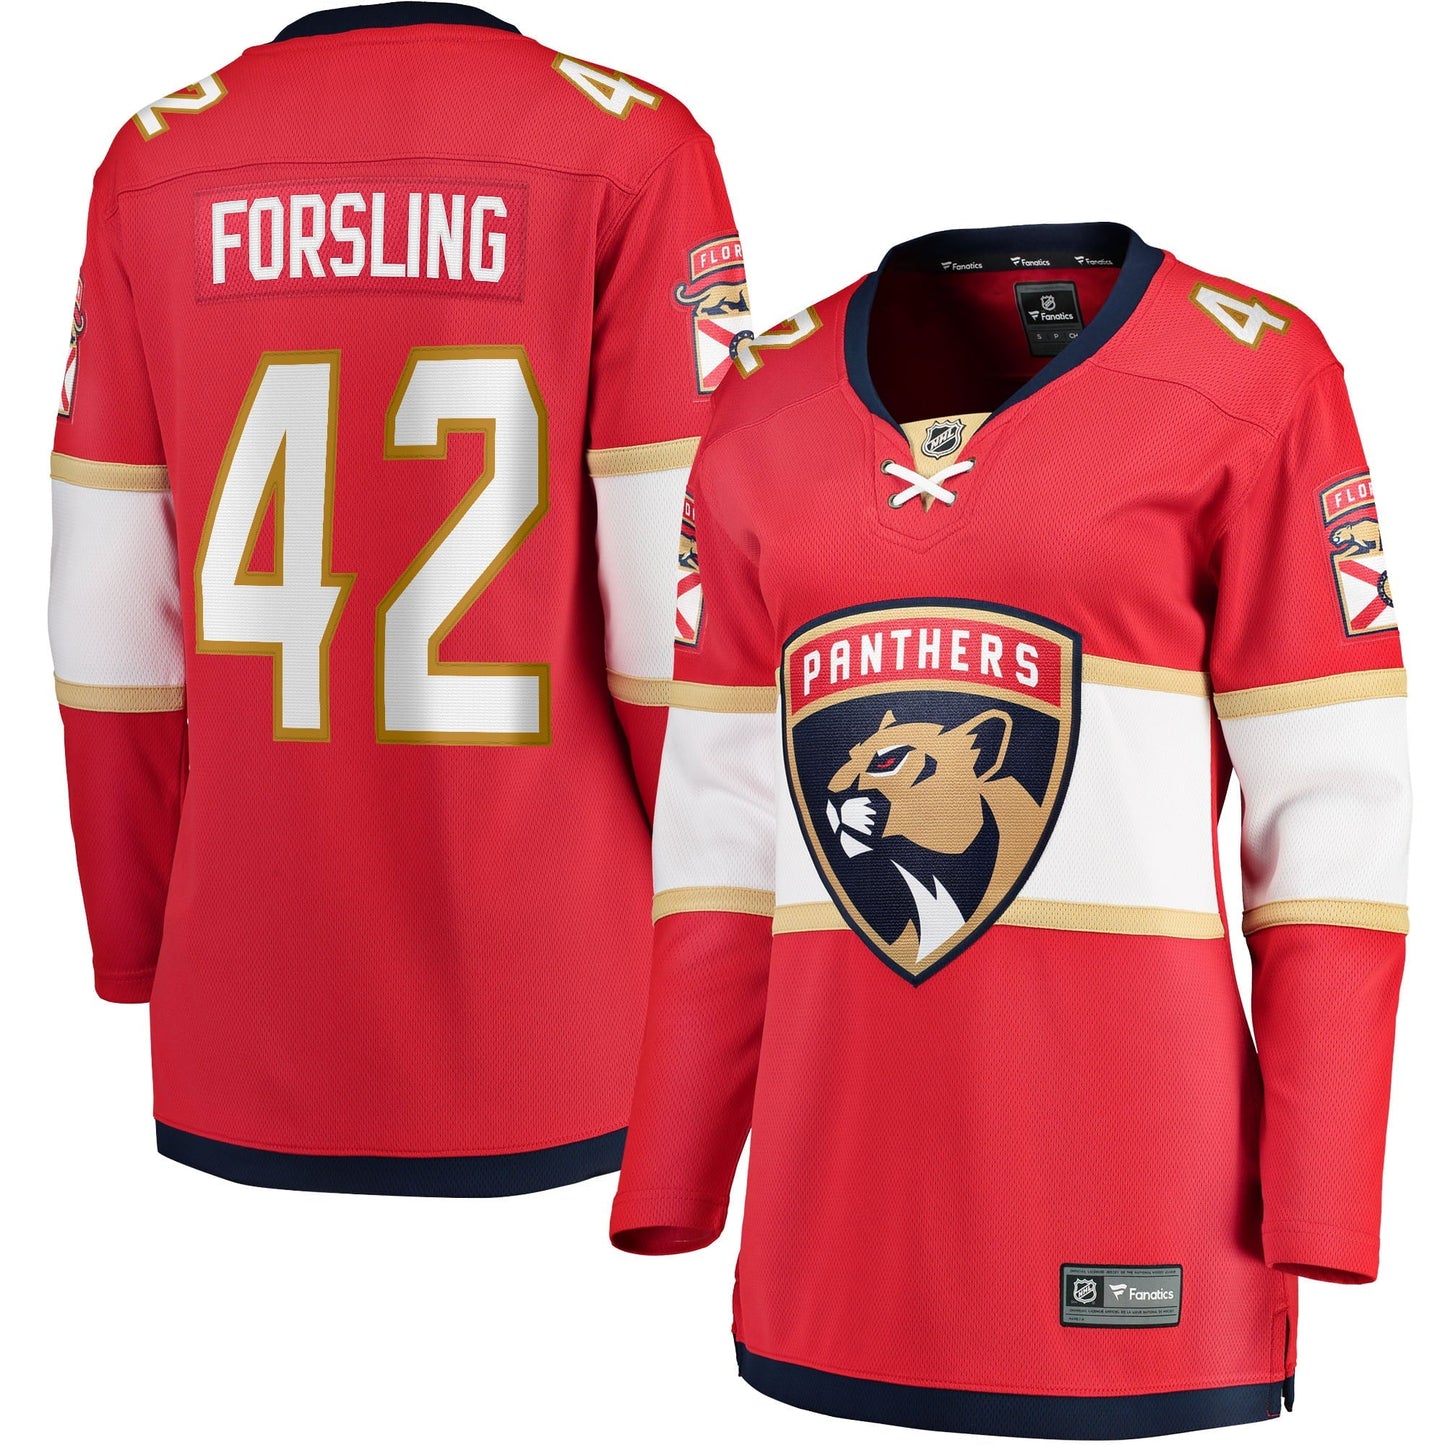 Women's Fanatics Branded Gustav Forsling Red Florida Panthers Home Breakaway Player Jersey